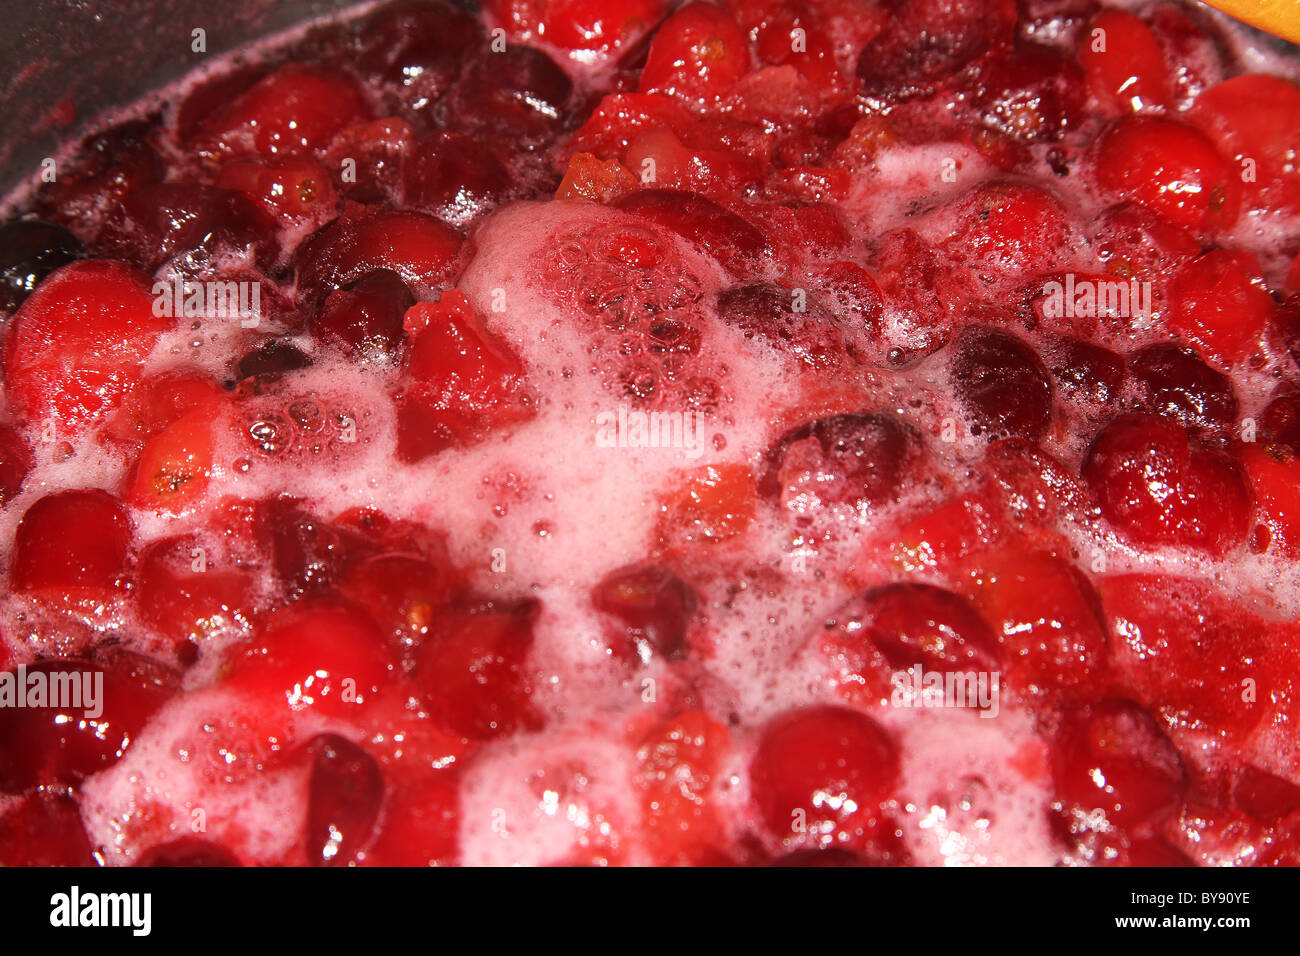 Cranberries boiling in water and sugar. Stock Photo